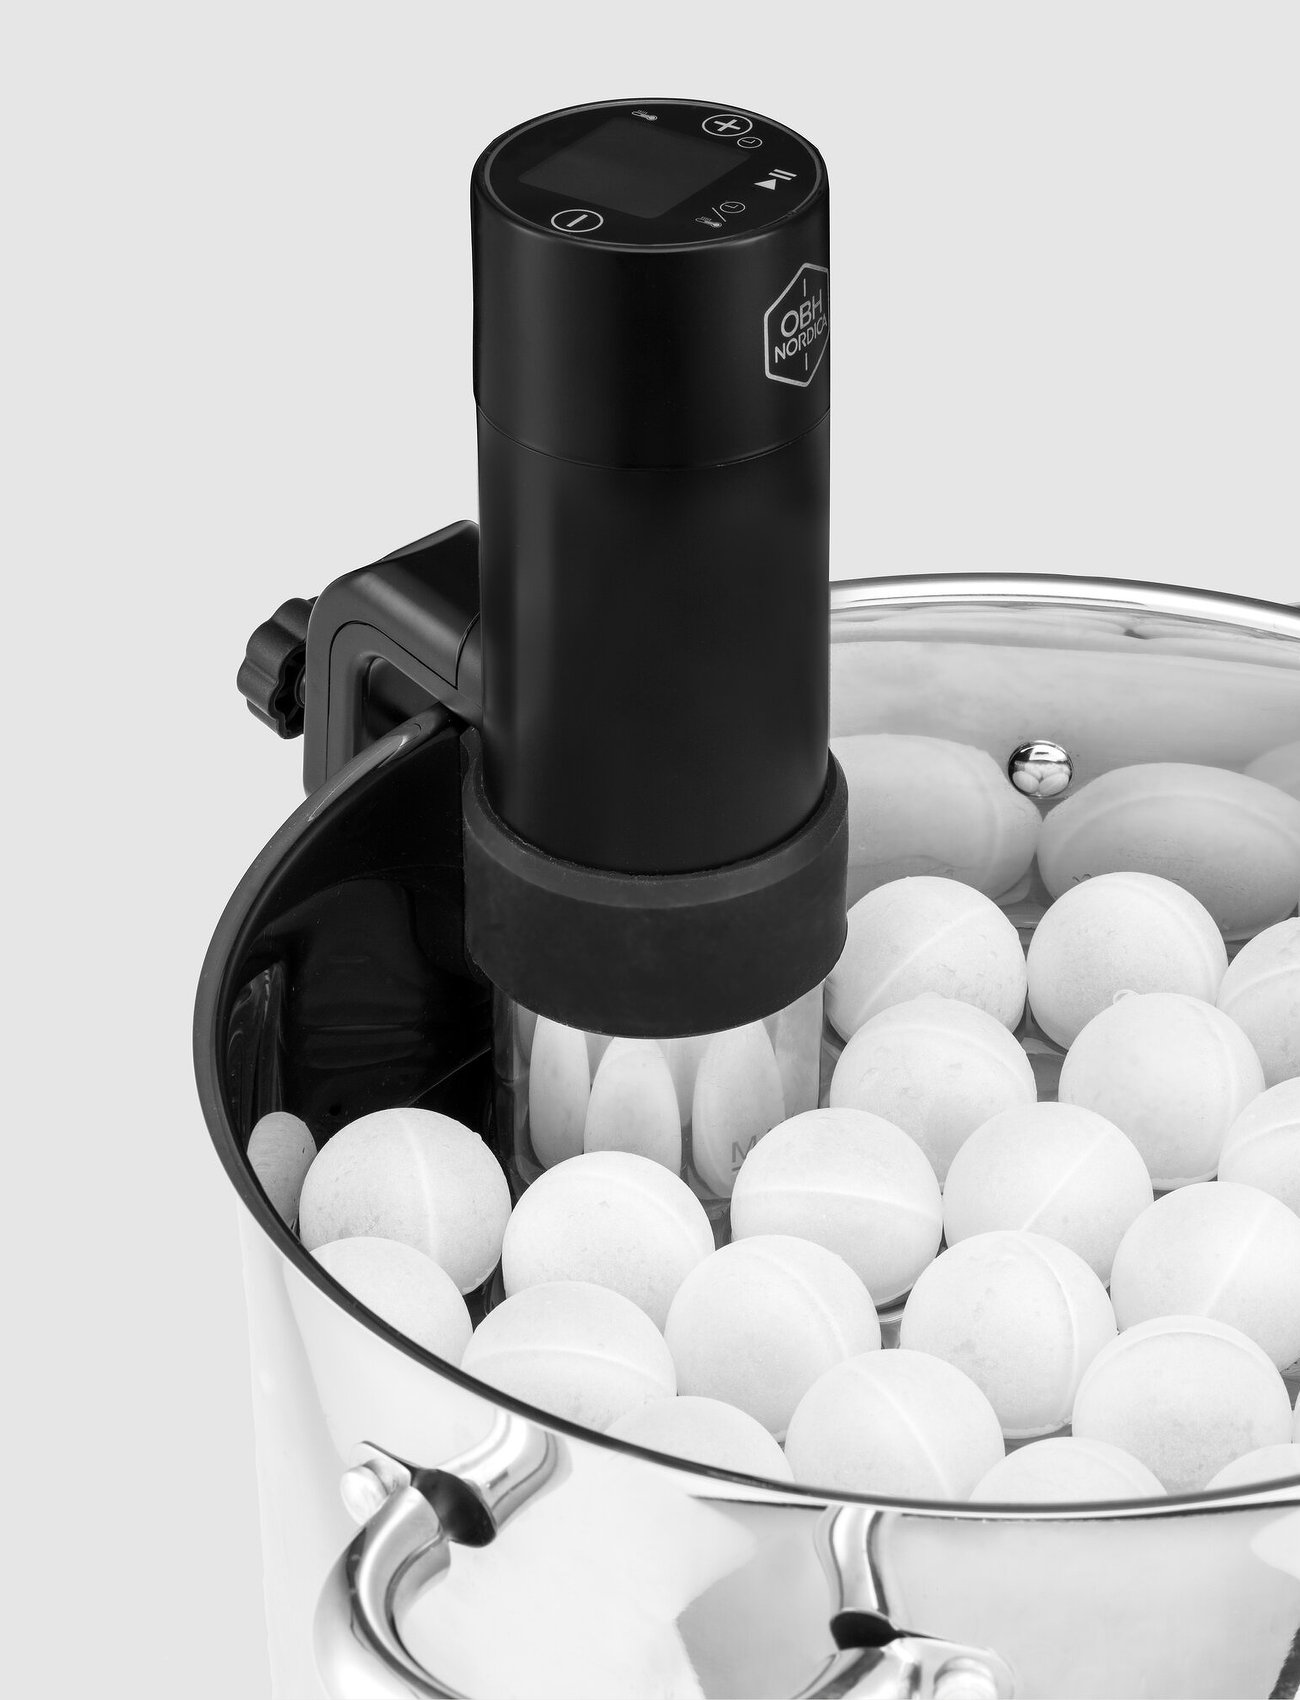 OBH Nordica - Immersion sous vide pro plus sous vide cooker - najniższe ceny - black and stainless steel - 1